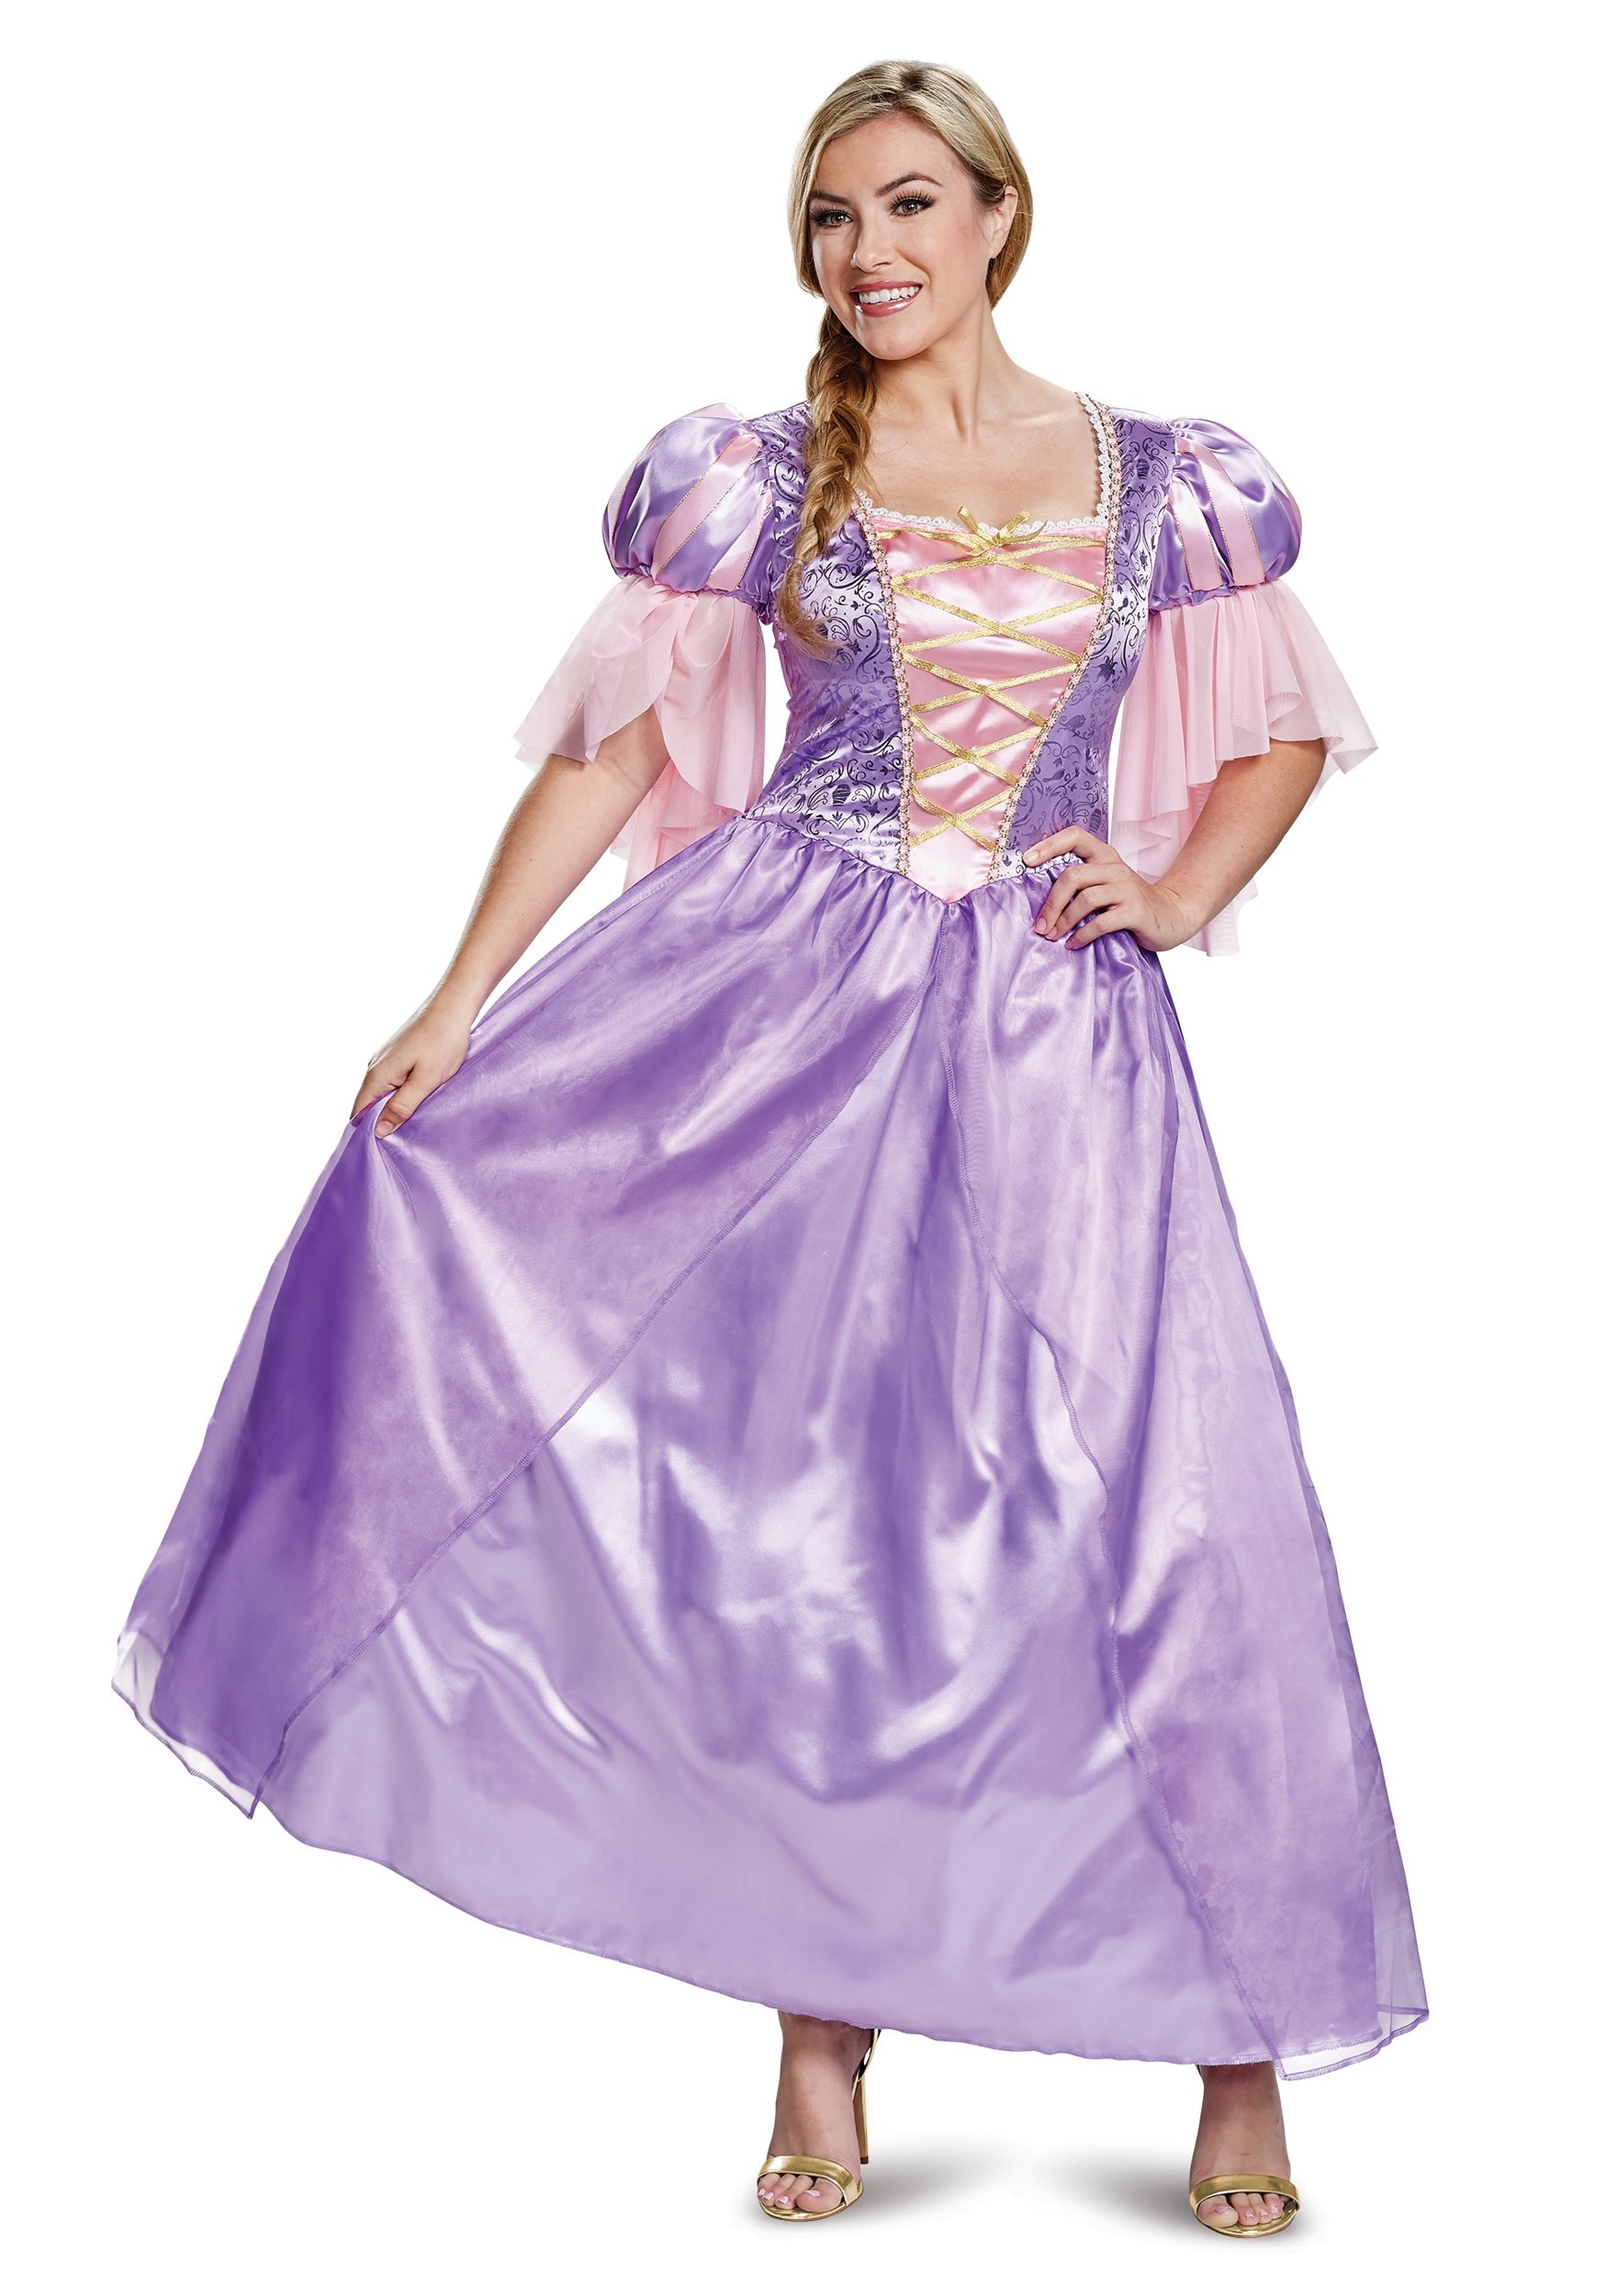 Tangled Deluxe Rapunzel Costume for Adults